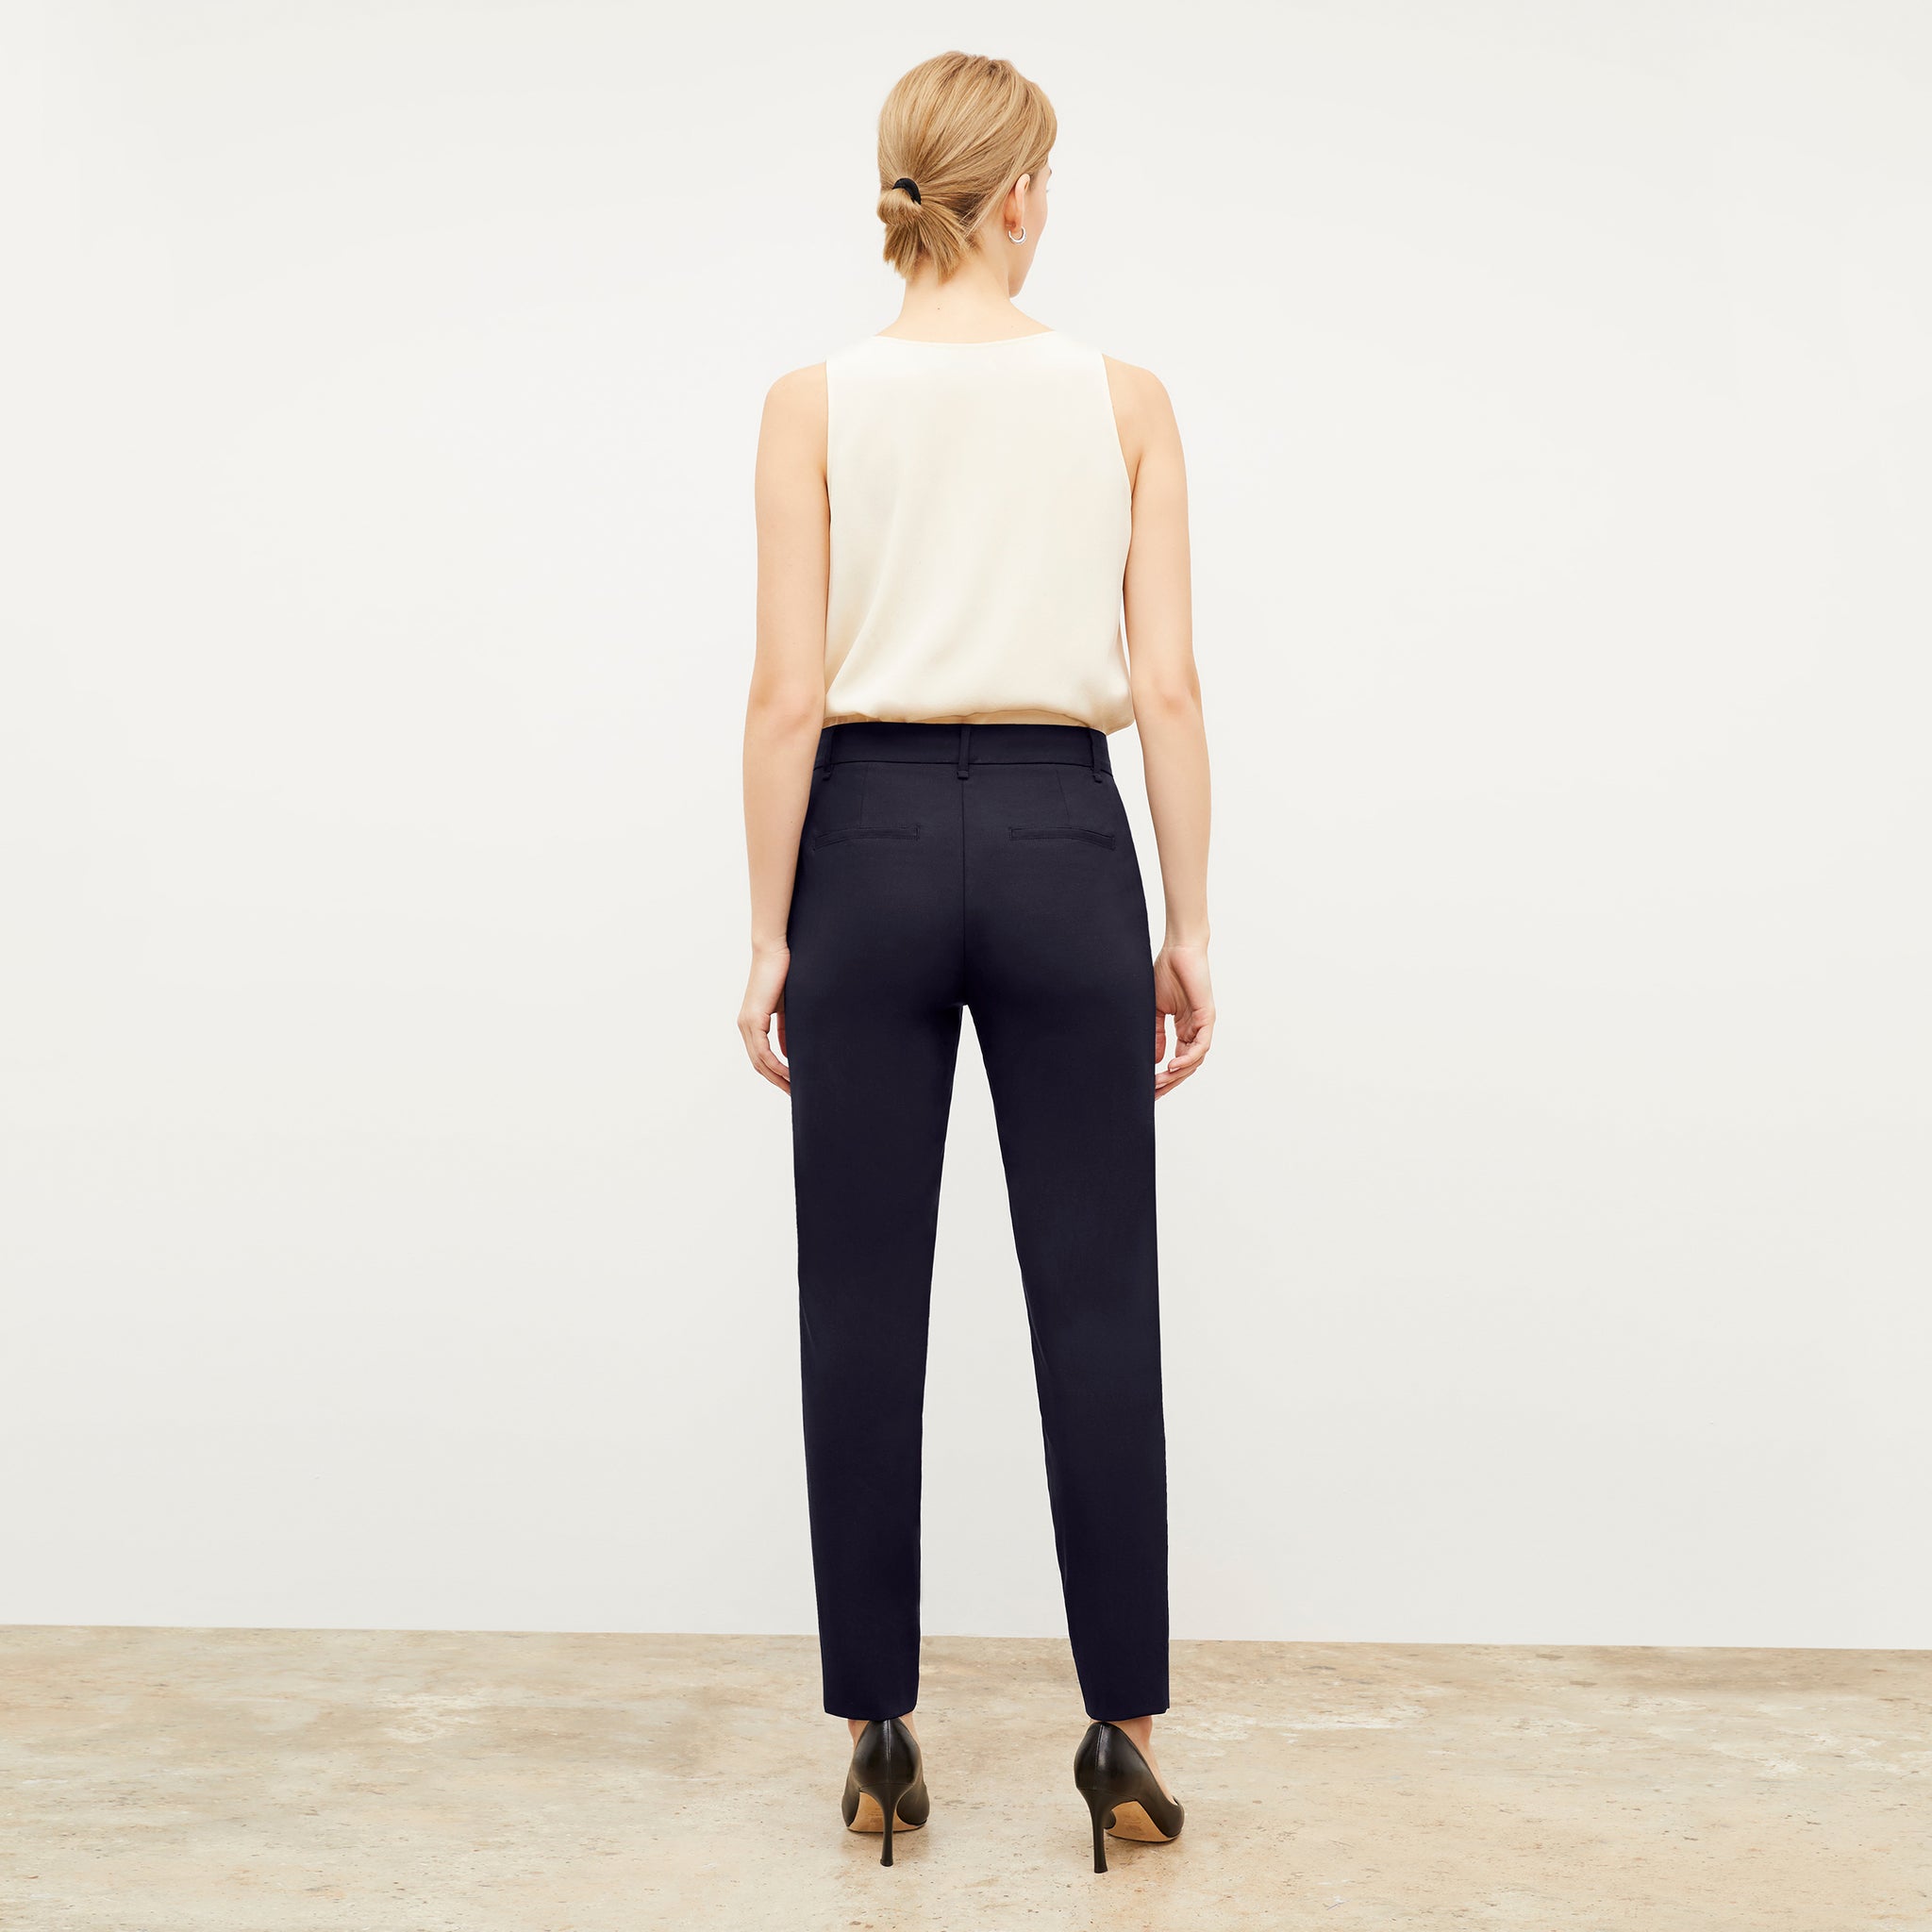 Back image of a woman wearing the Mejia pant in Galaxy Blue